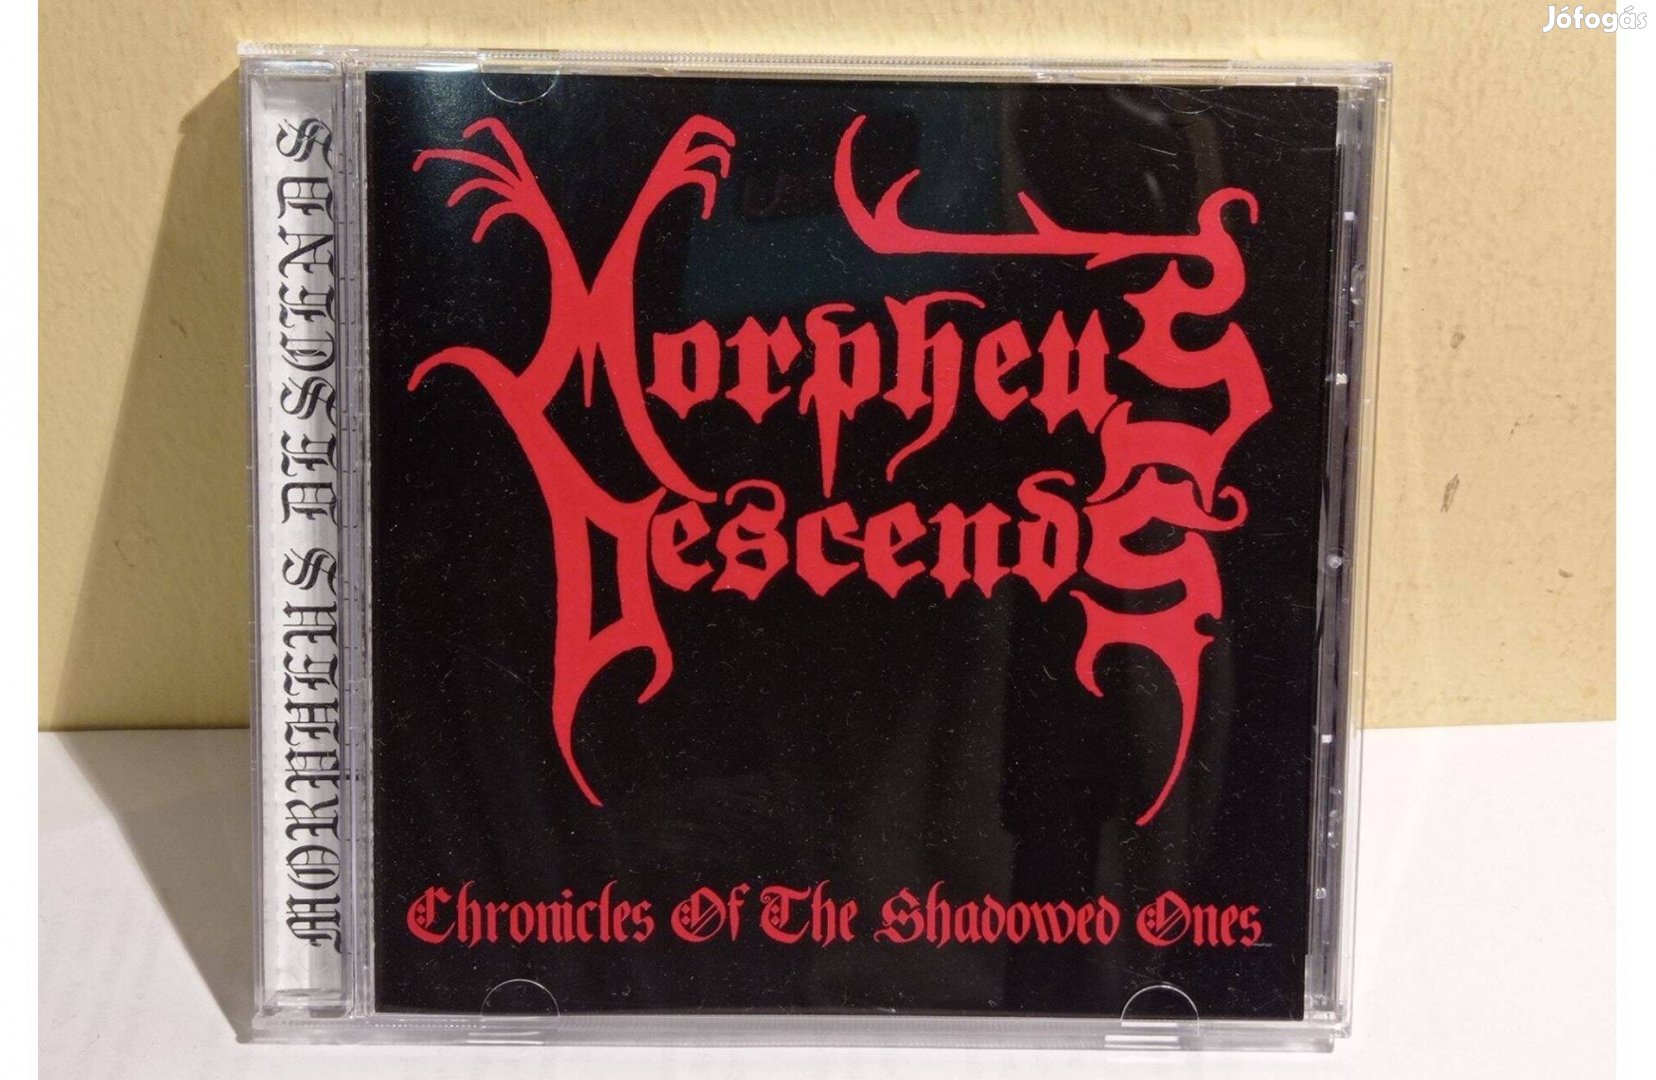 Cd Morpheus Descends Chronicles Of The Shadowed Ones